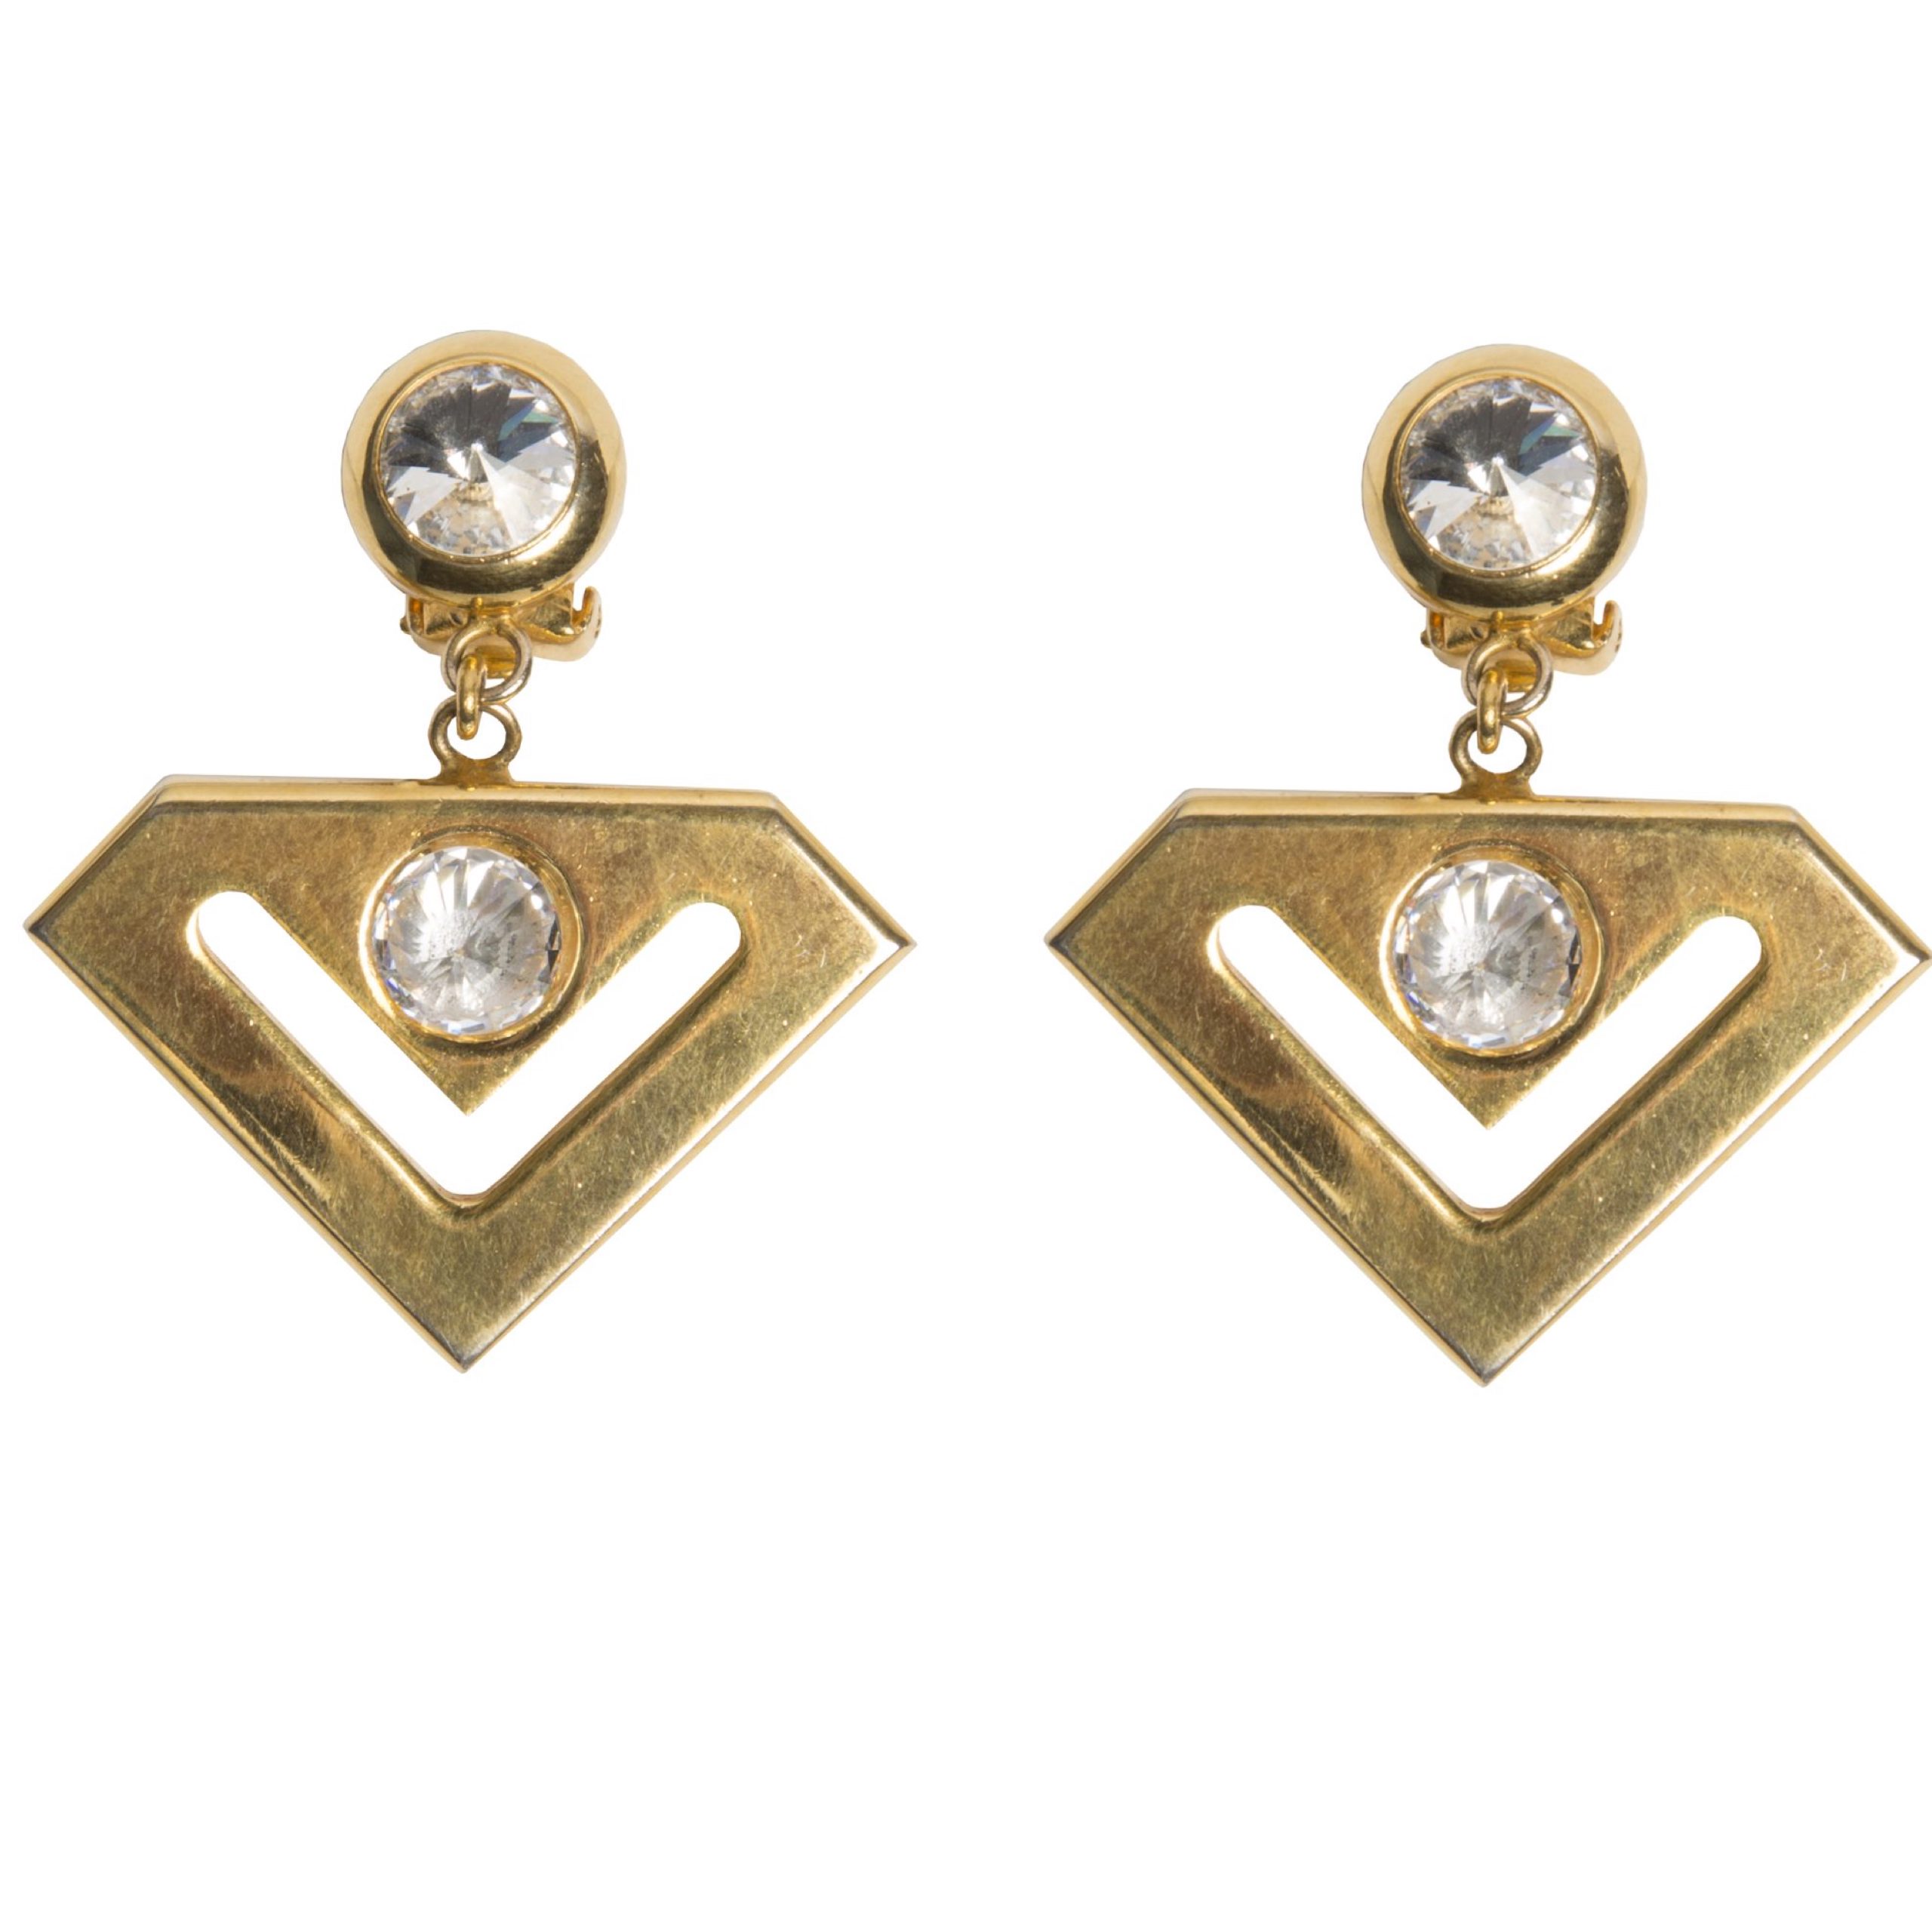 Vintage gold triangle earrings with crystal